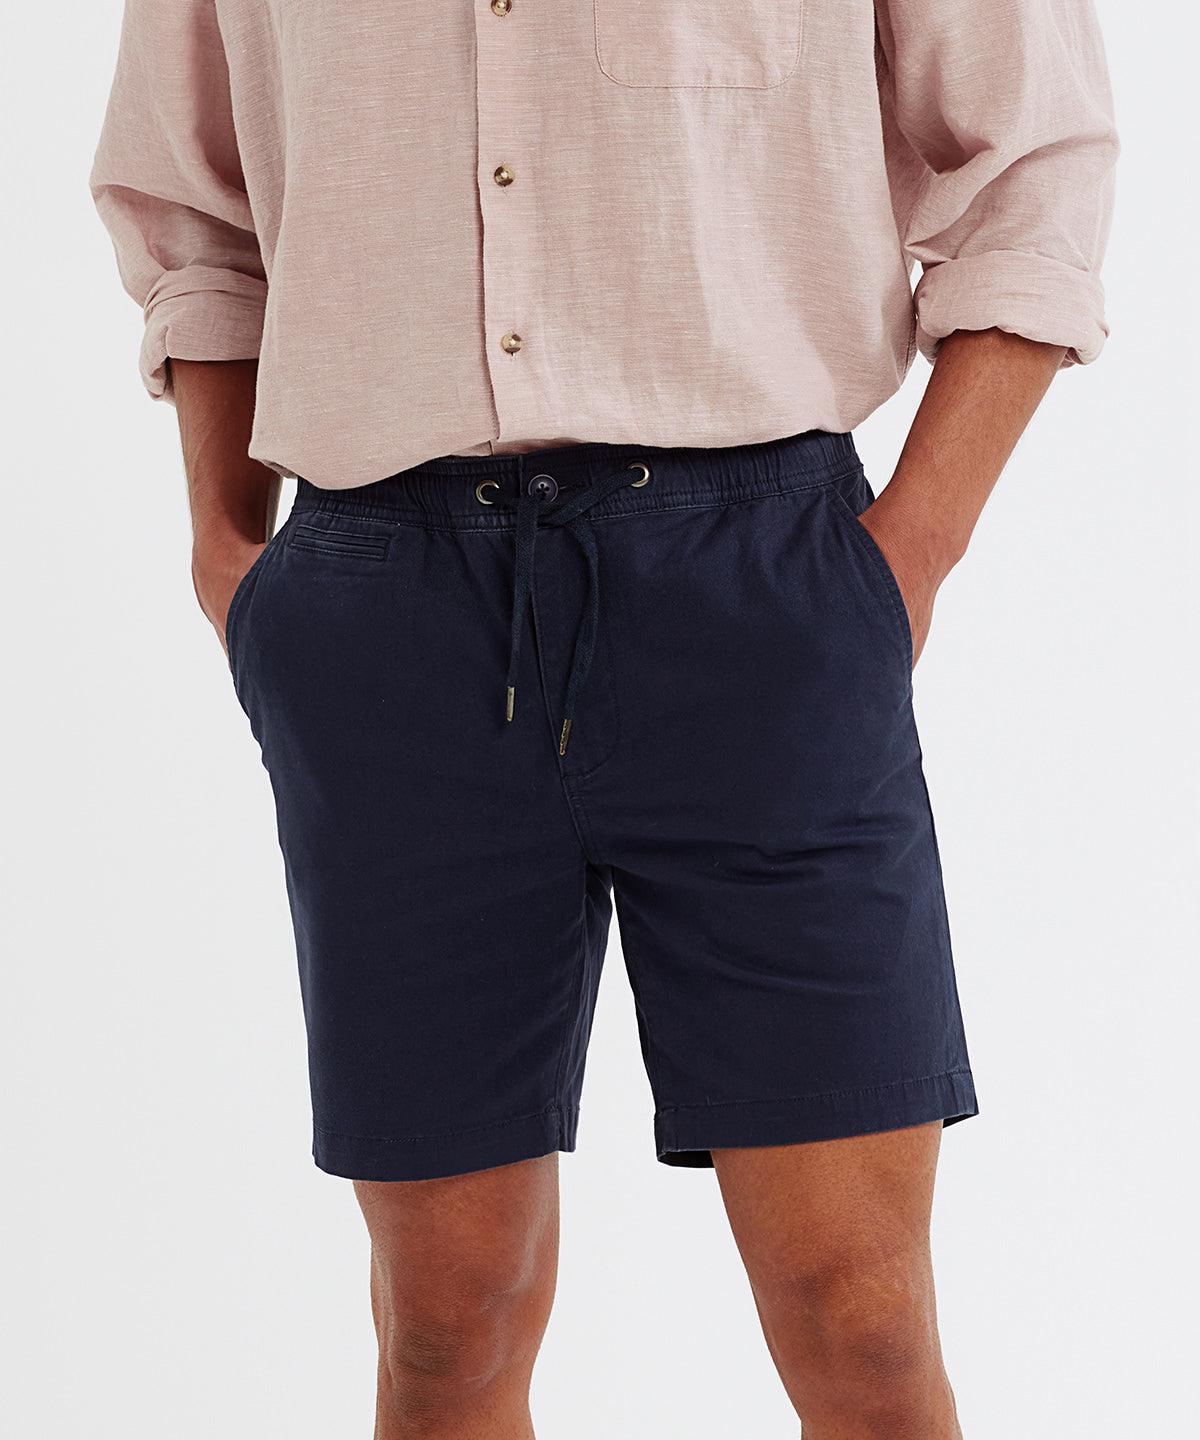 Olive - Men’s drawstring chino shorts Shorts Wombat New Styles for 2023, Rebrandable, Trousers & Shorts Schoolwear Centres